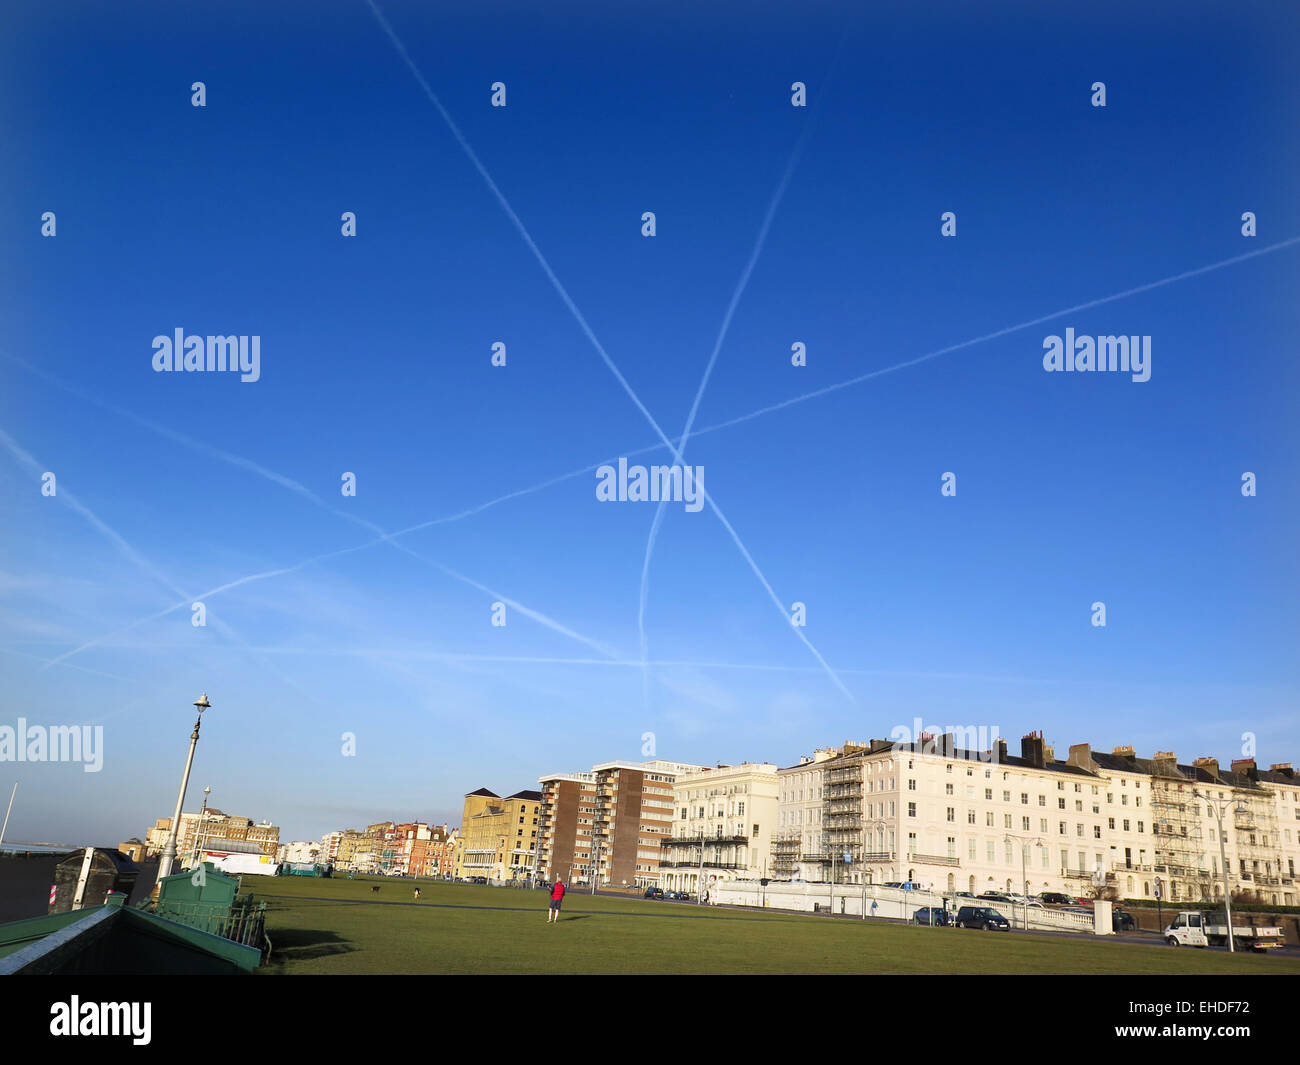 The vapour trails of three planes form a star shaped with their Contrails over Hove lawns on Brighton and Hove seafront. The planes were departing from Gatwick airport for Europe. Stock Photo